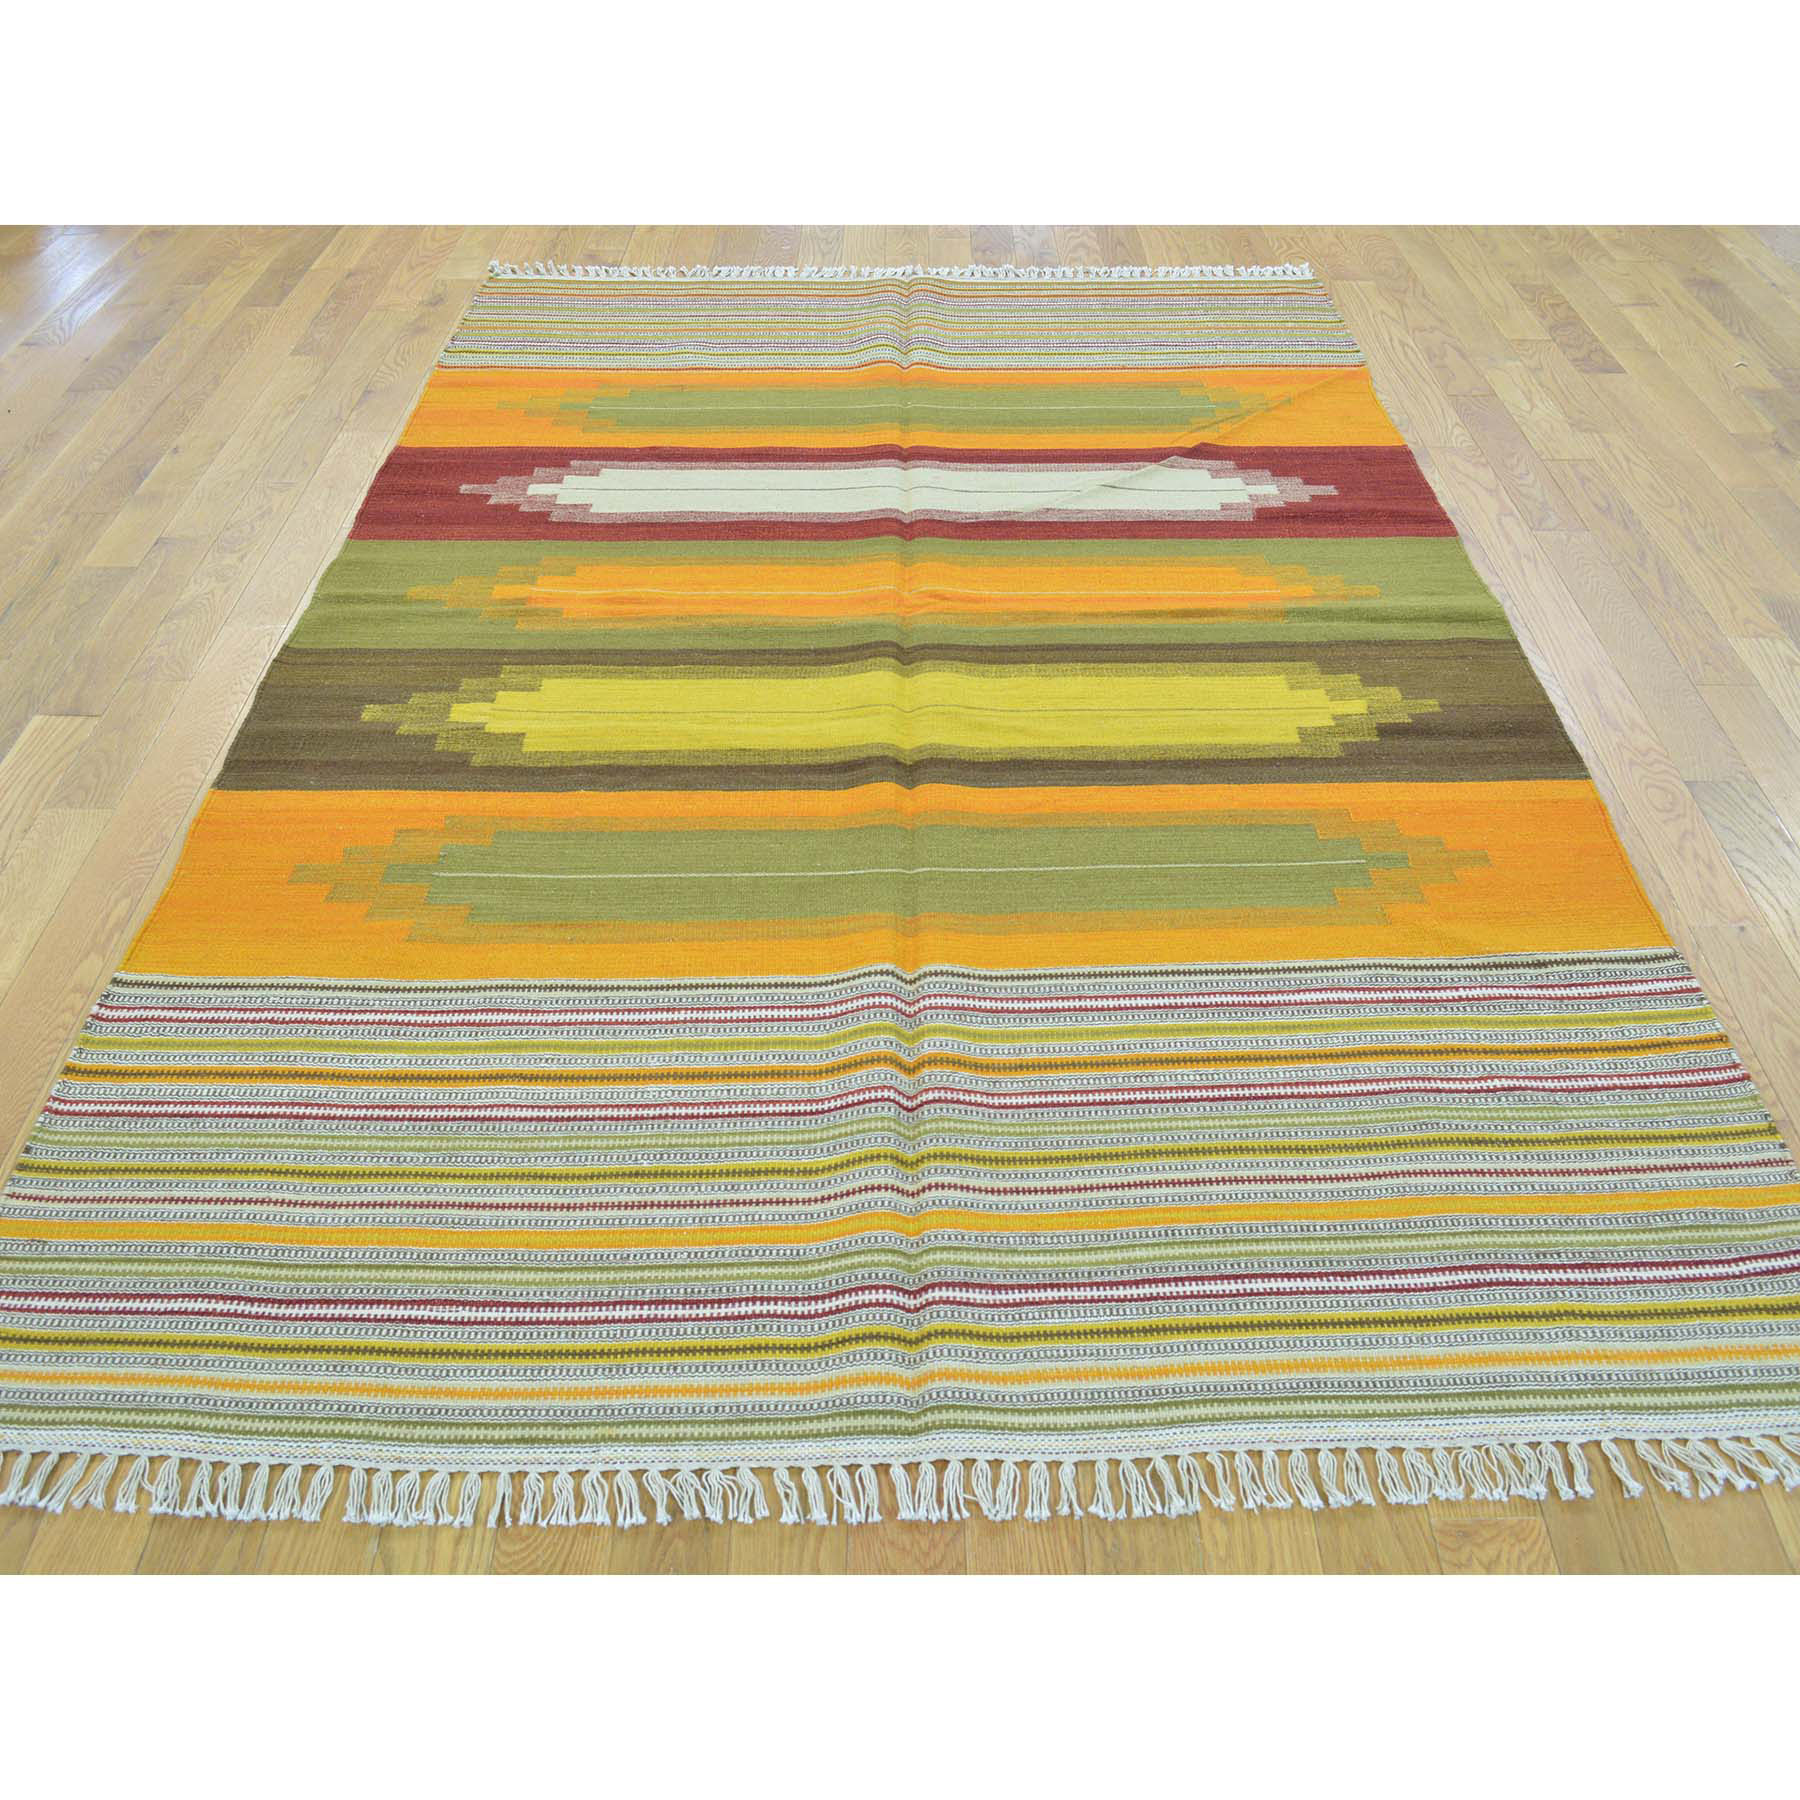 5-1 x8-3  Multicolored Durie Kilim Flat Weave Hand Woven Oriental Rug 